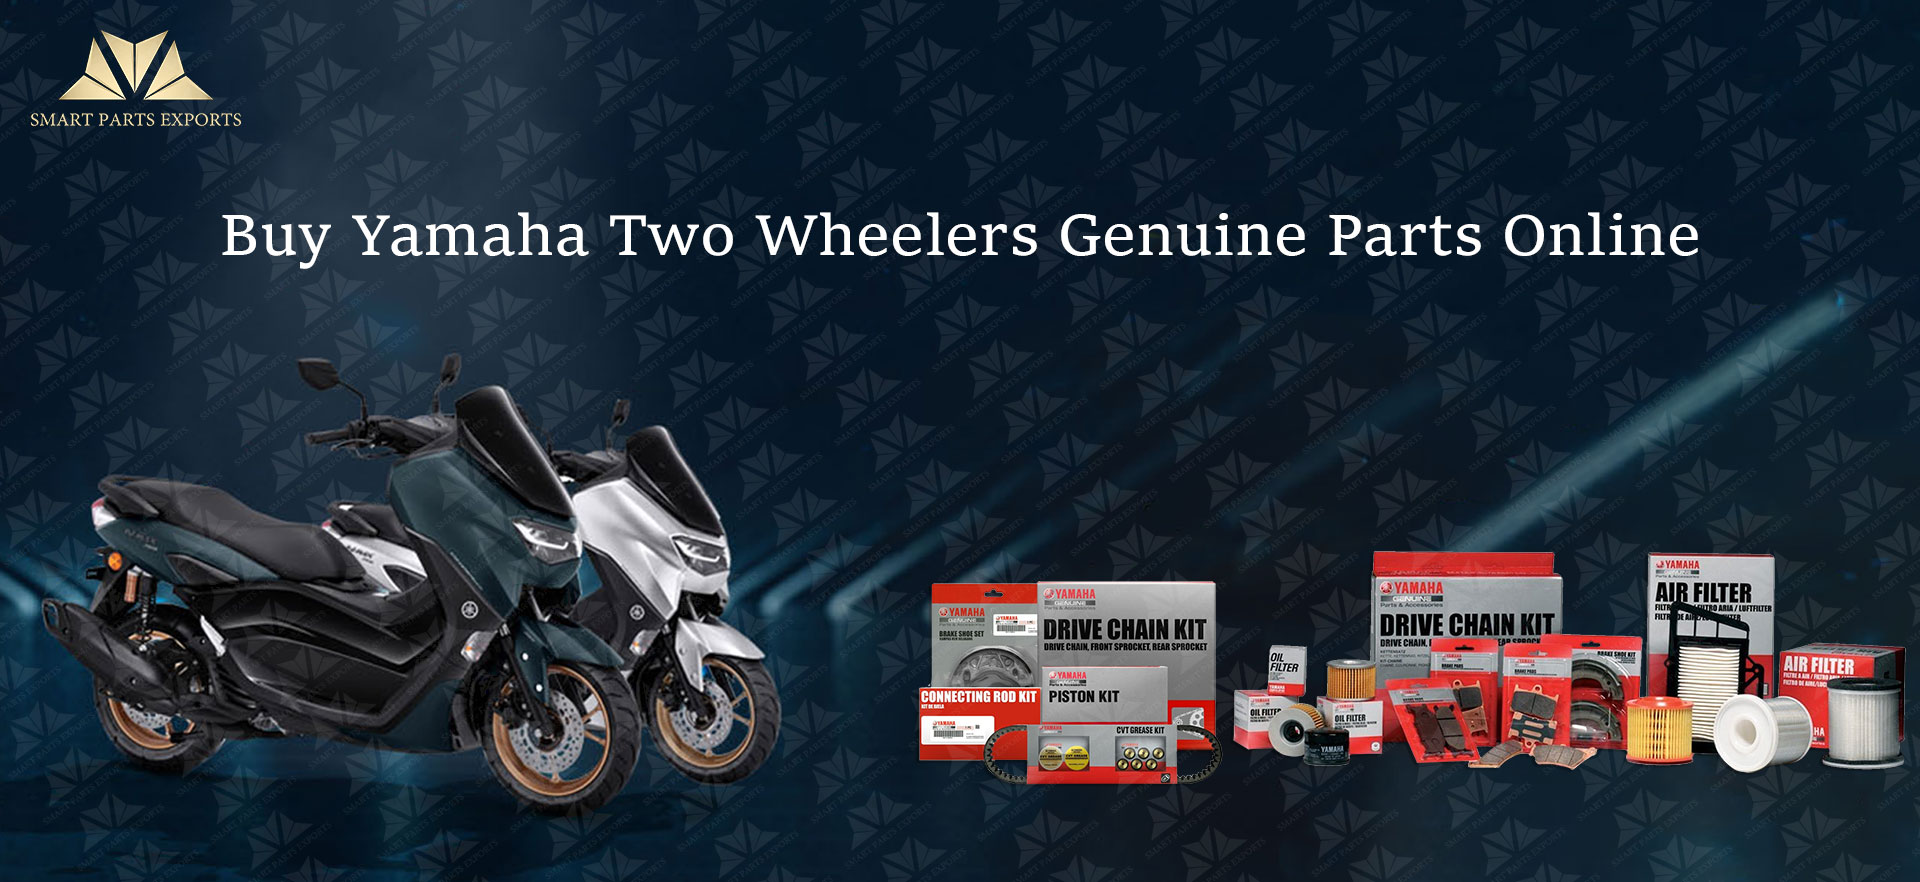 Buy Yamaha Aftermarket Parts & Accessories At the Best Price